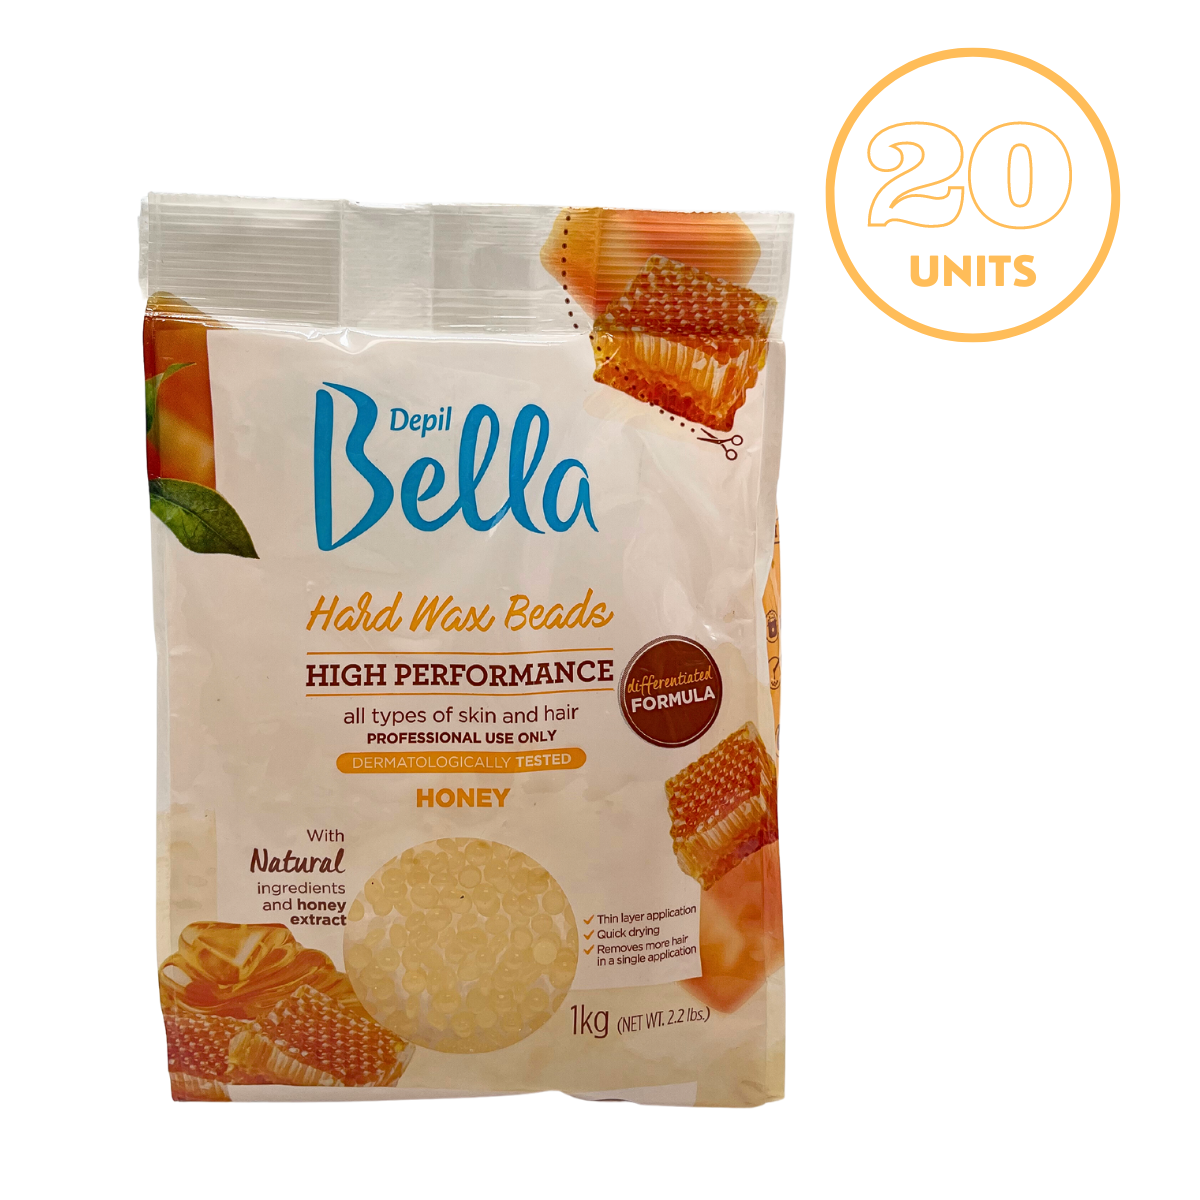 Depil Bella Hard Wax Beads Honey - Professional Hair Removal, 2.2 lbs (20 Units Offer) - Buy professional cosmetics dedicated to hair removal